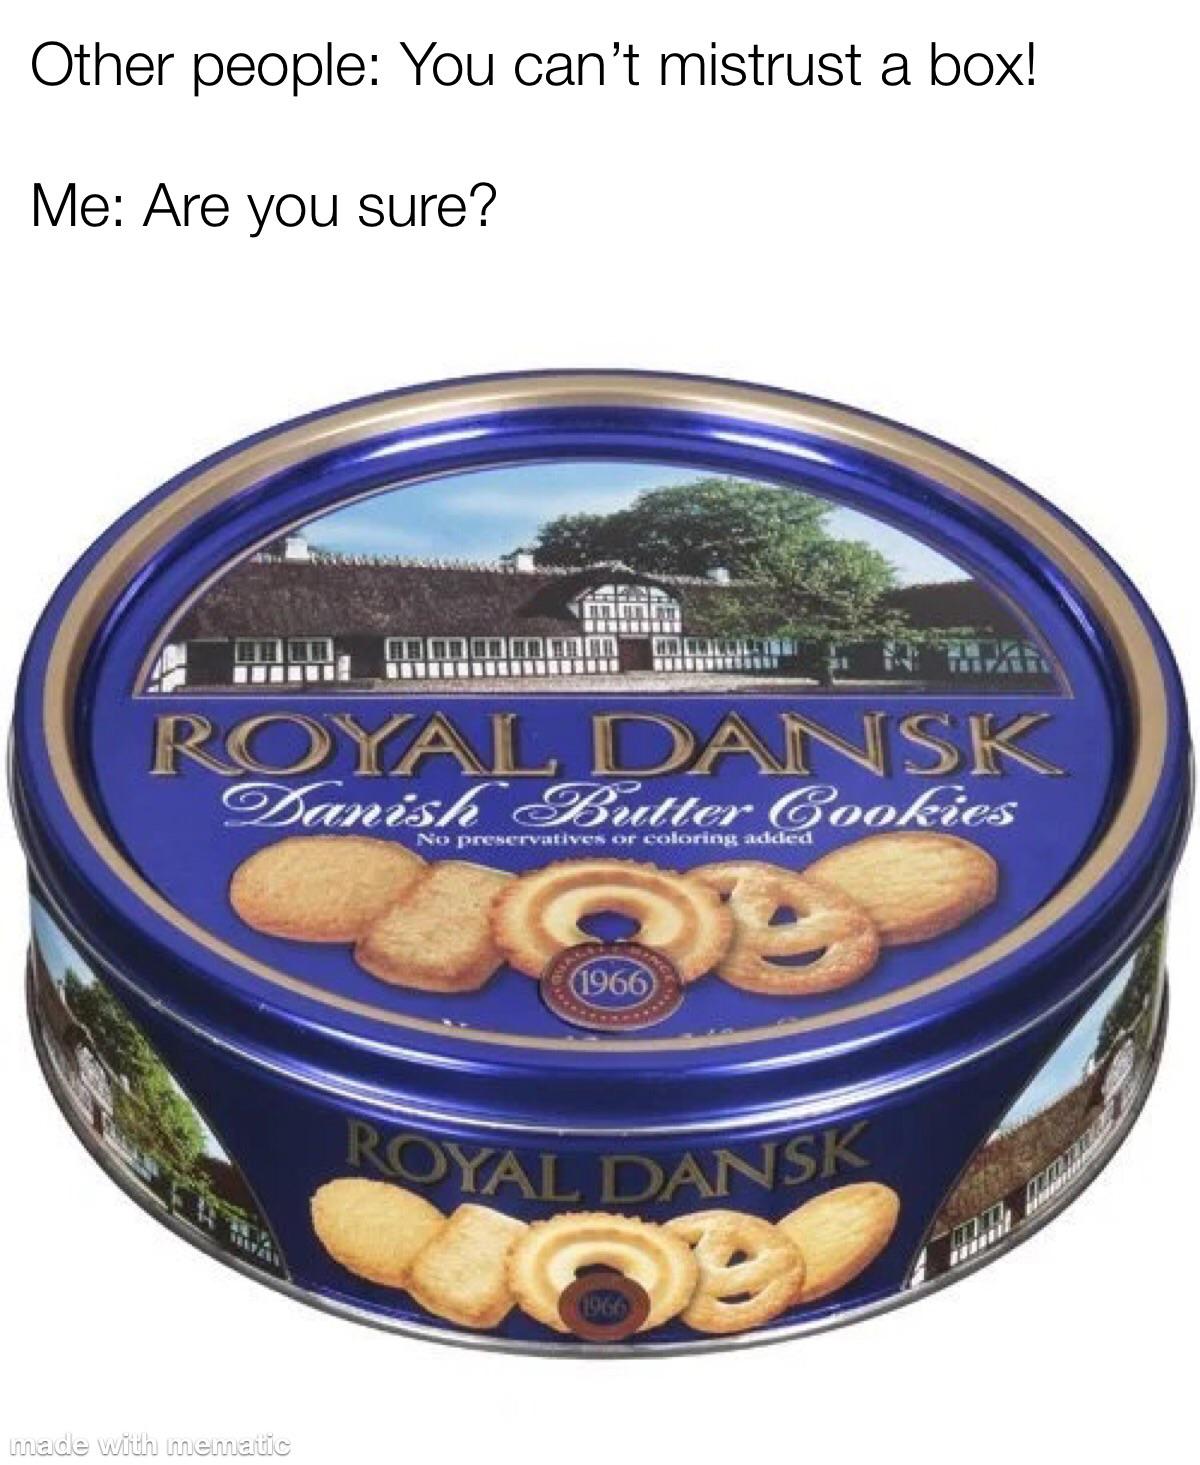 dank memes - schrodinger's cookies - Other people You can't mistrust a box! Me Are you sure? Royal Dansk Danish Butter Cookies No preservatives or coloring added made with mematic 1966 Royal Dansk Of 1966